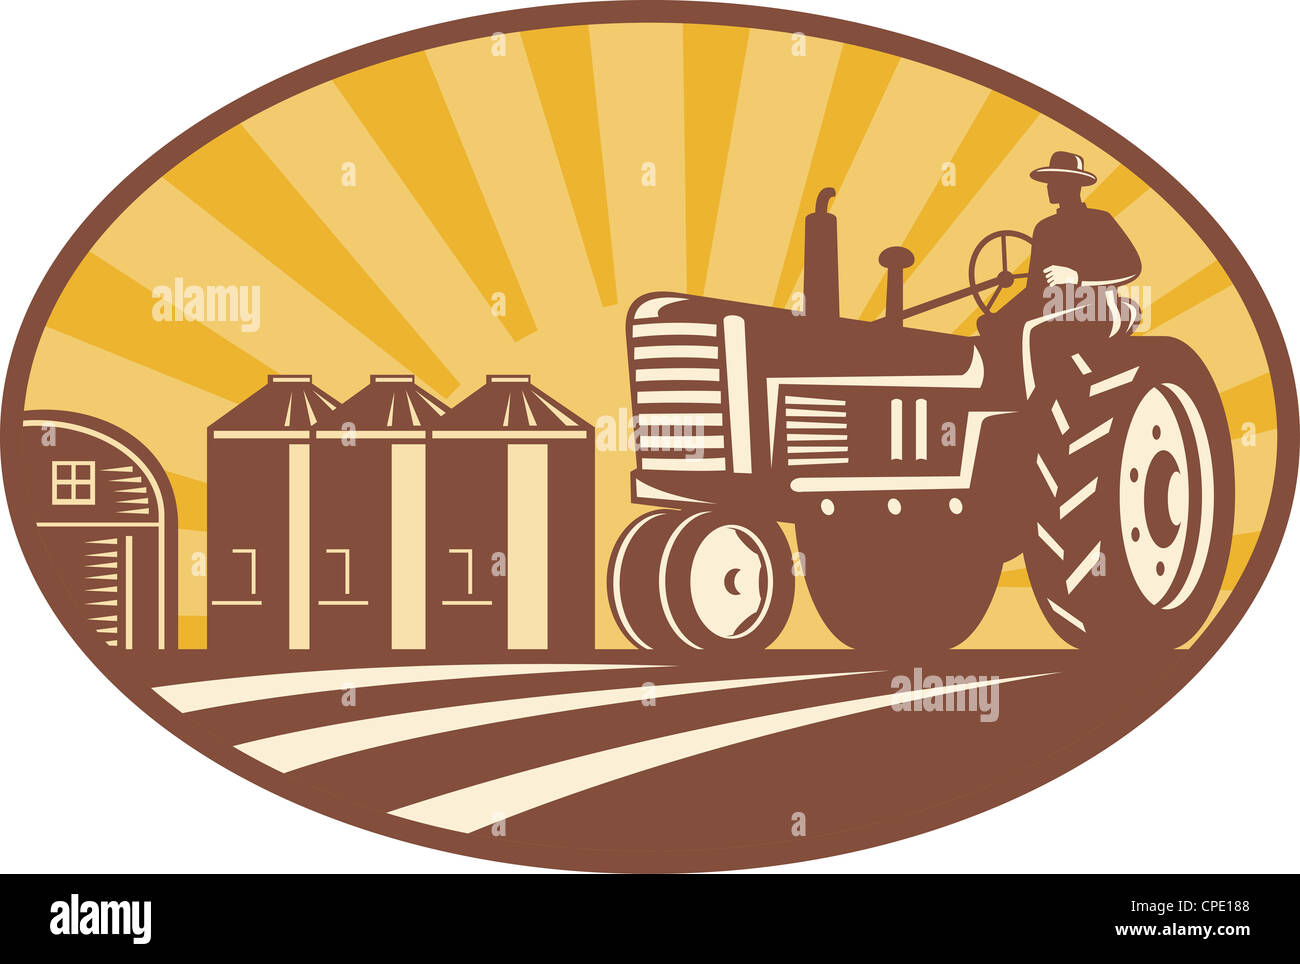 Illustration of a farmer driving a vintage farm tractor with barn and silos in background done in retro woodcut style. Stock Photo